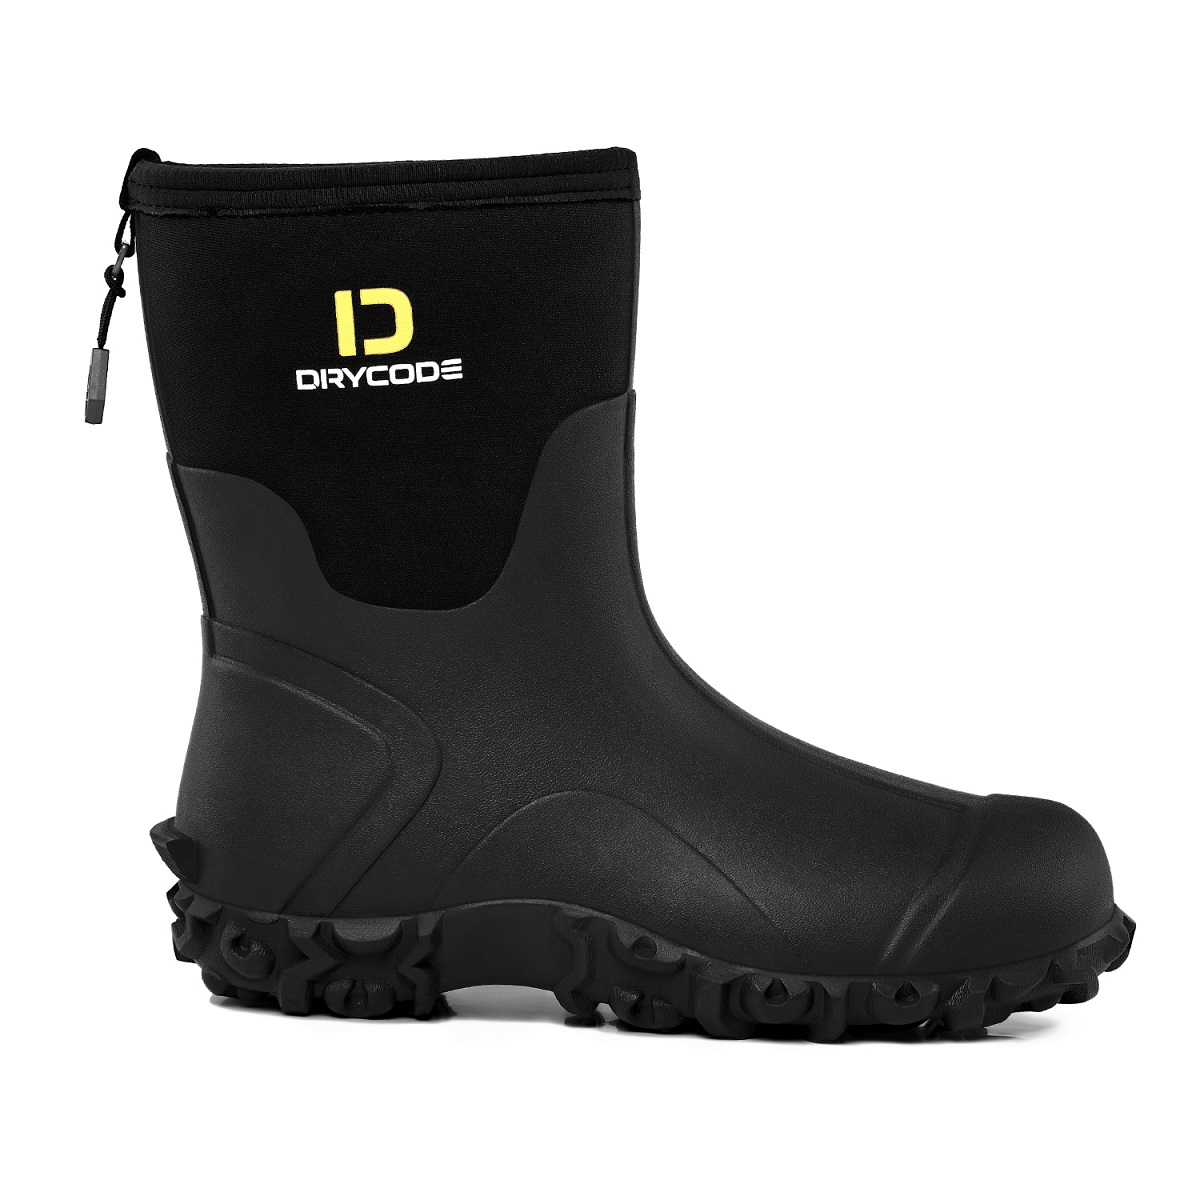 DRYCODE Waterproof Rubber Boots for Men (Black) with Steel Shank, Mid Calf Rain Boots